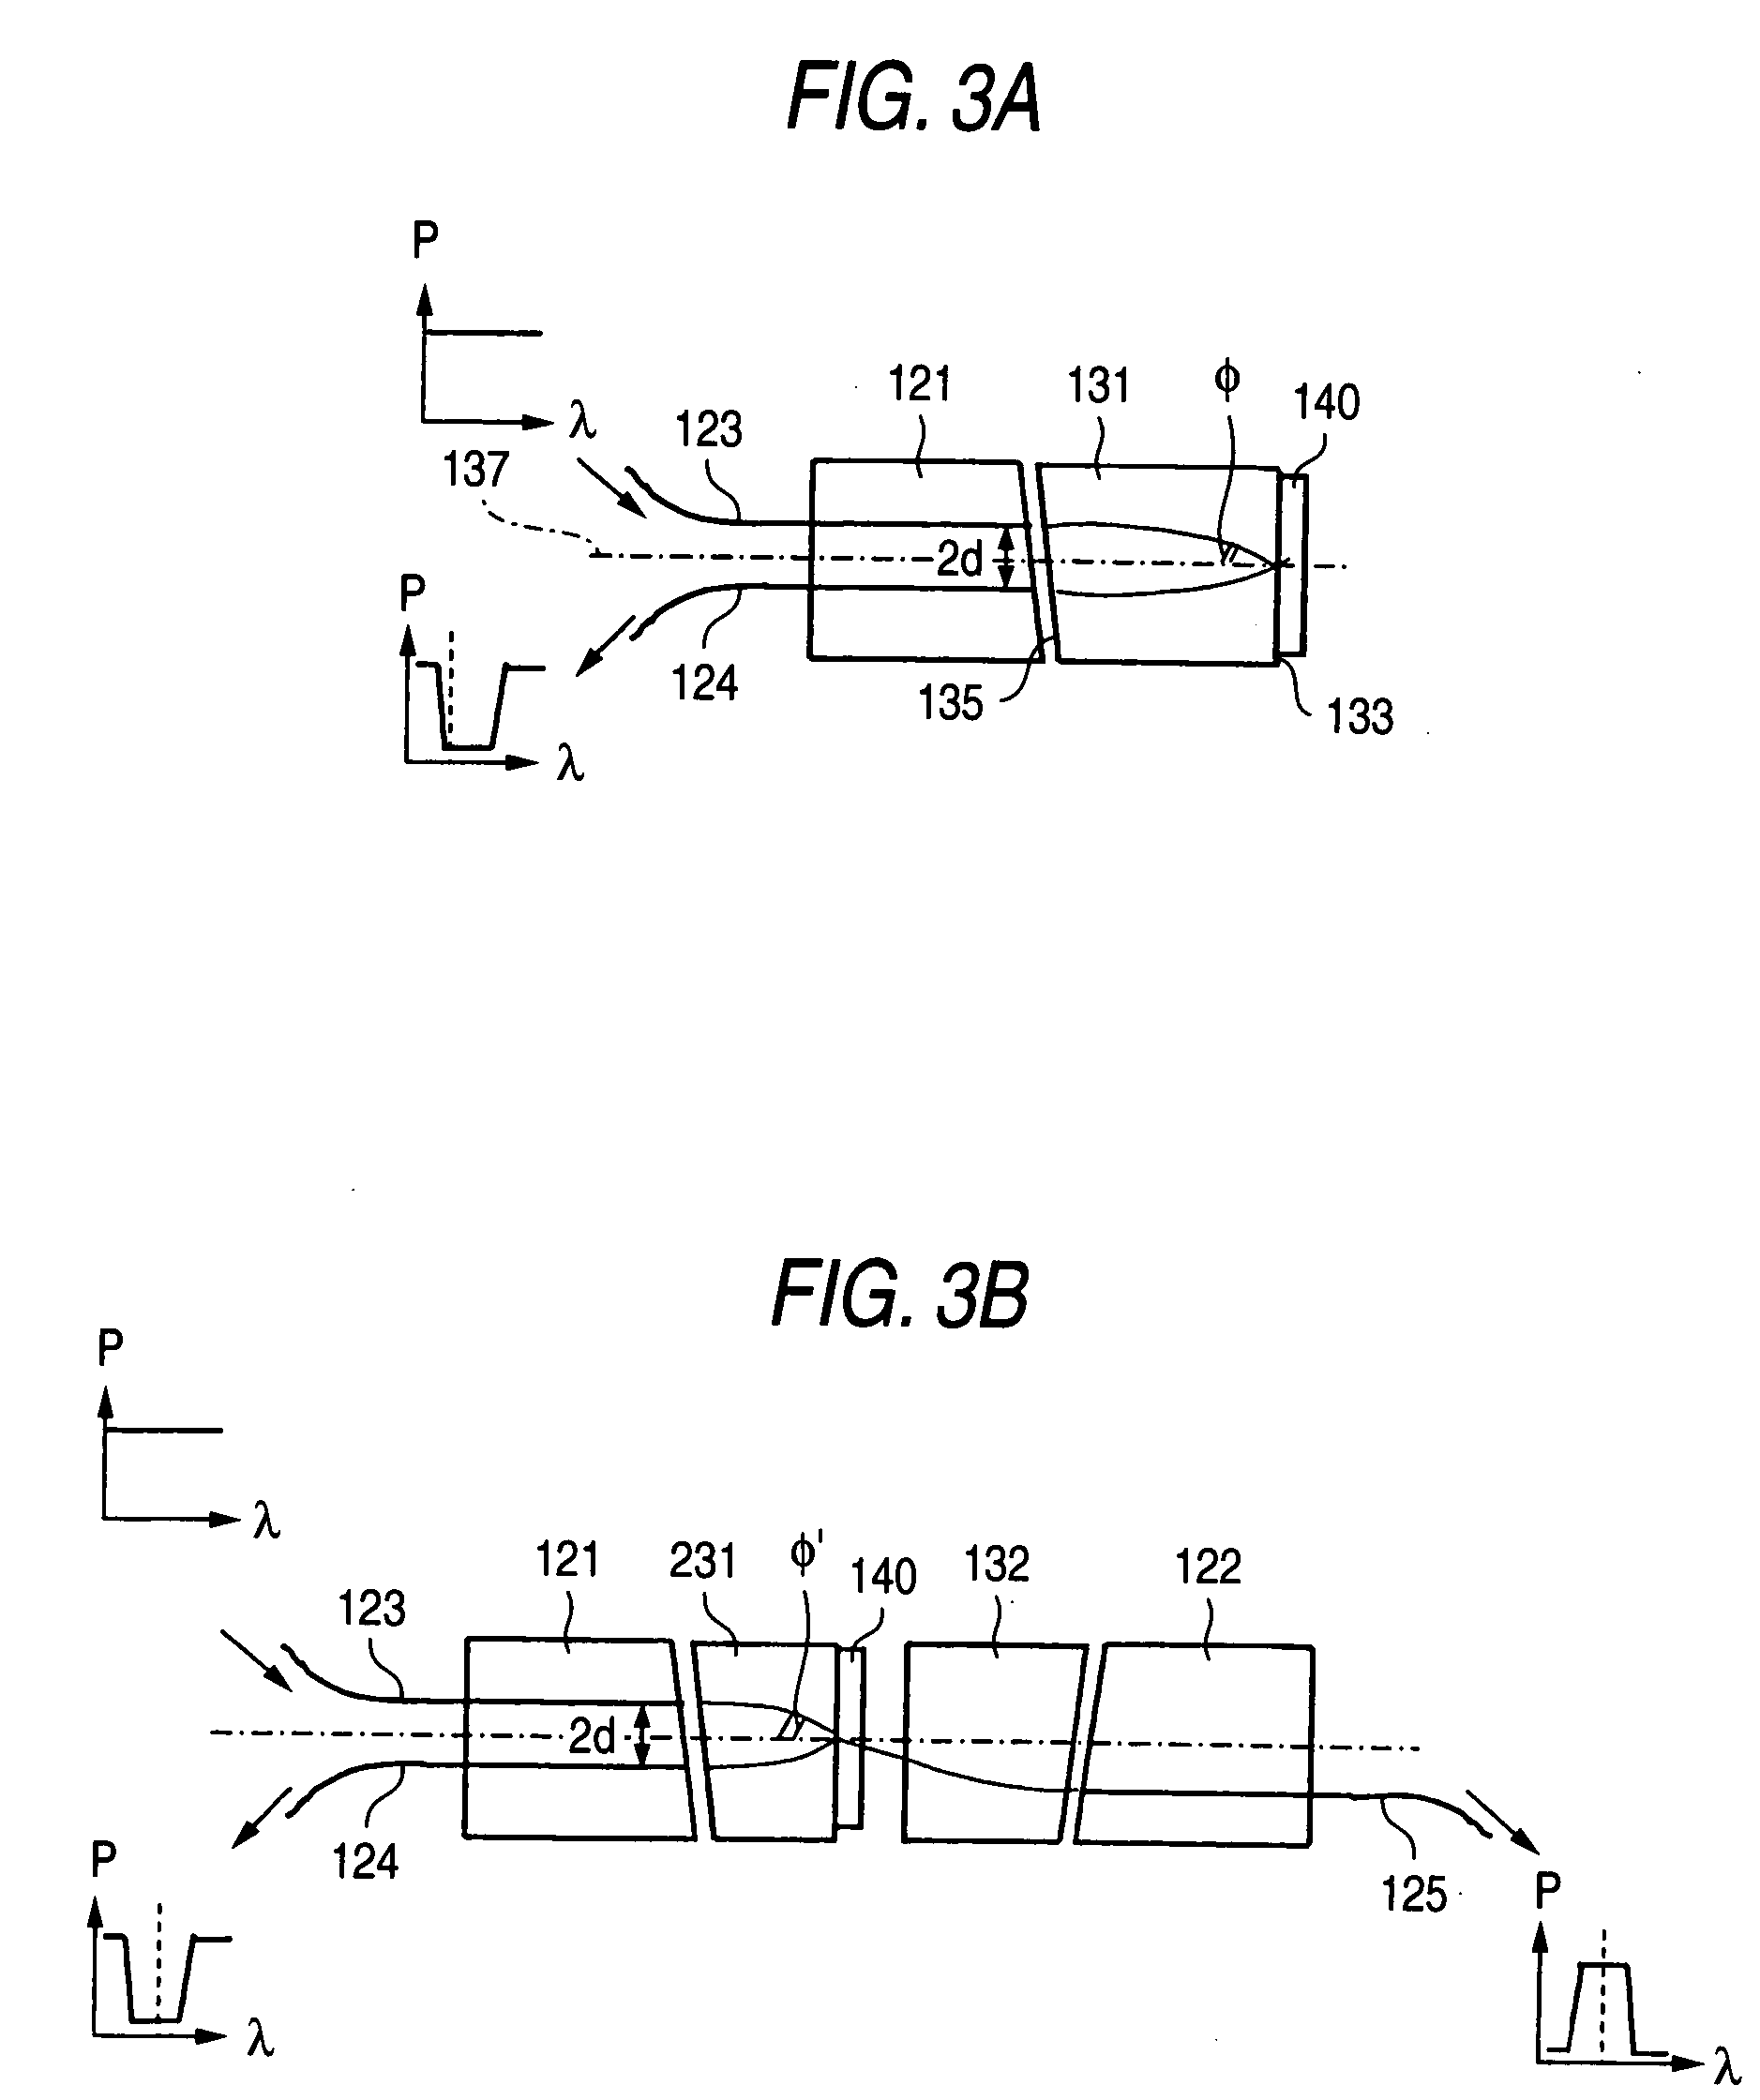 Wavelength selective optical device and method of tuning a wavelength characteristic of the same